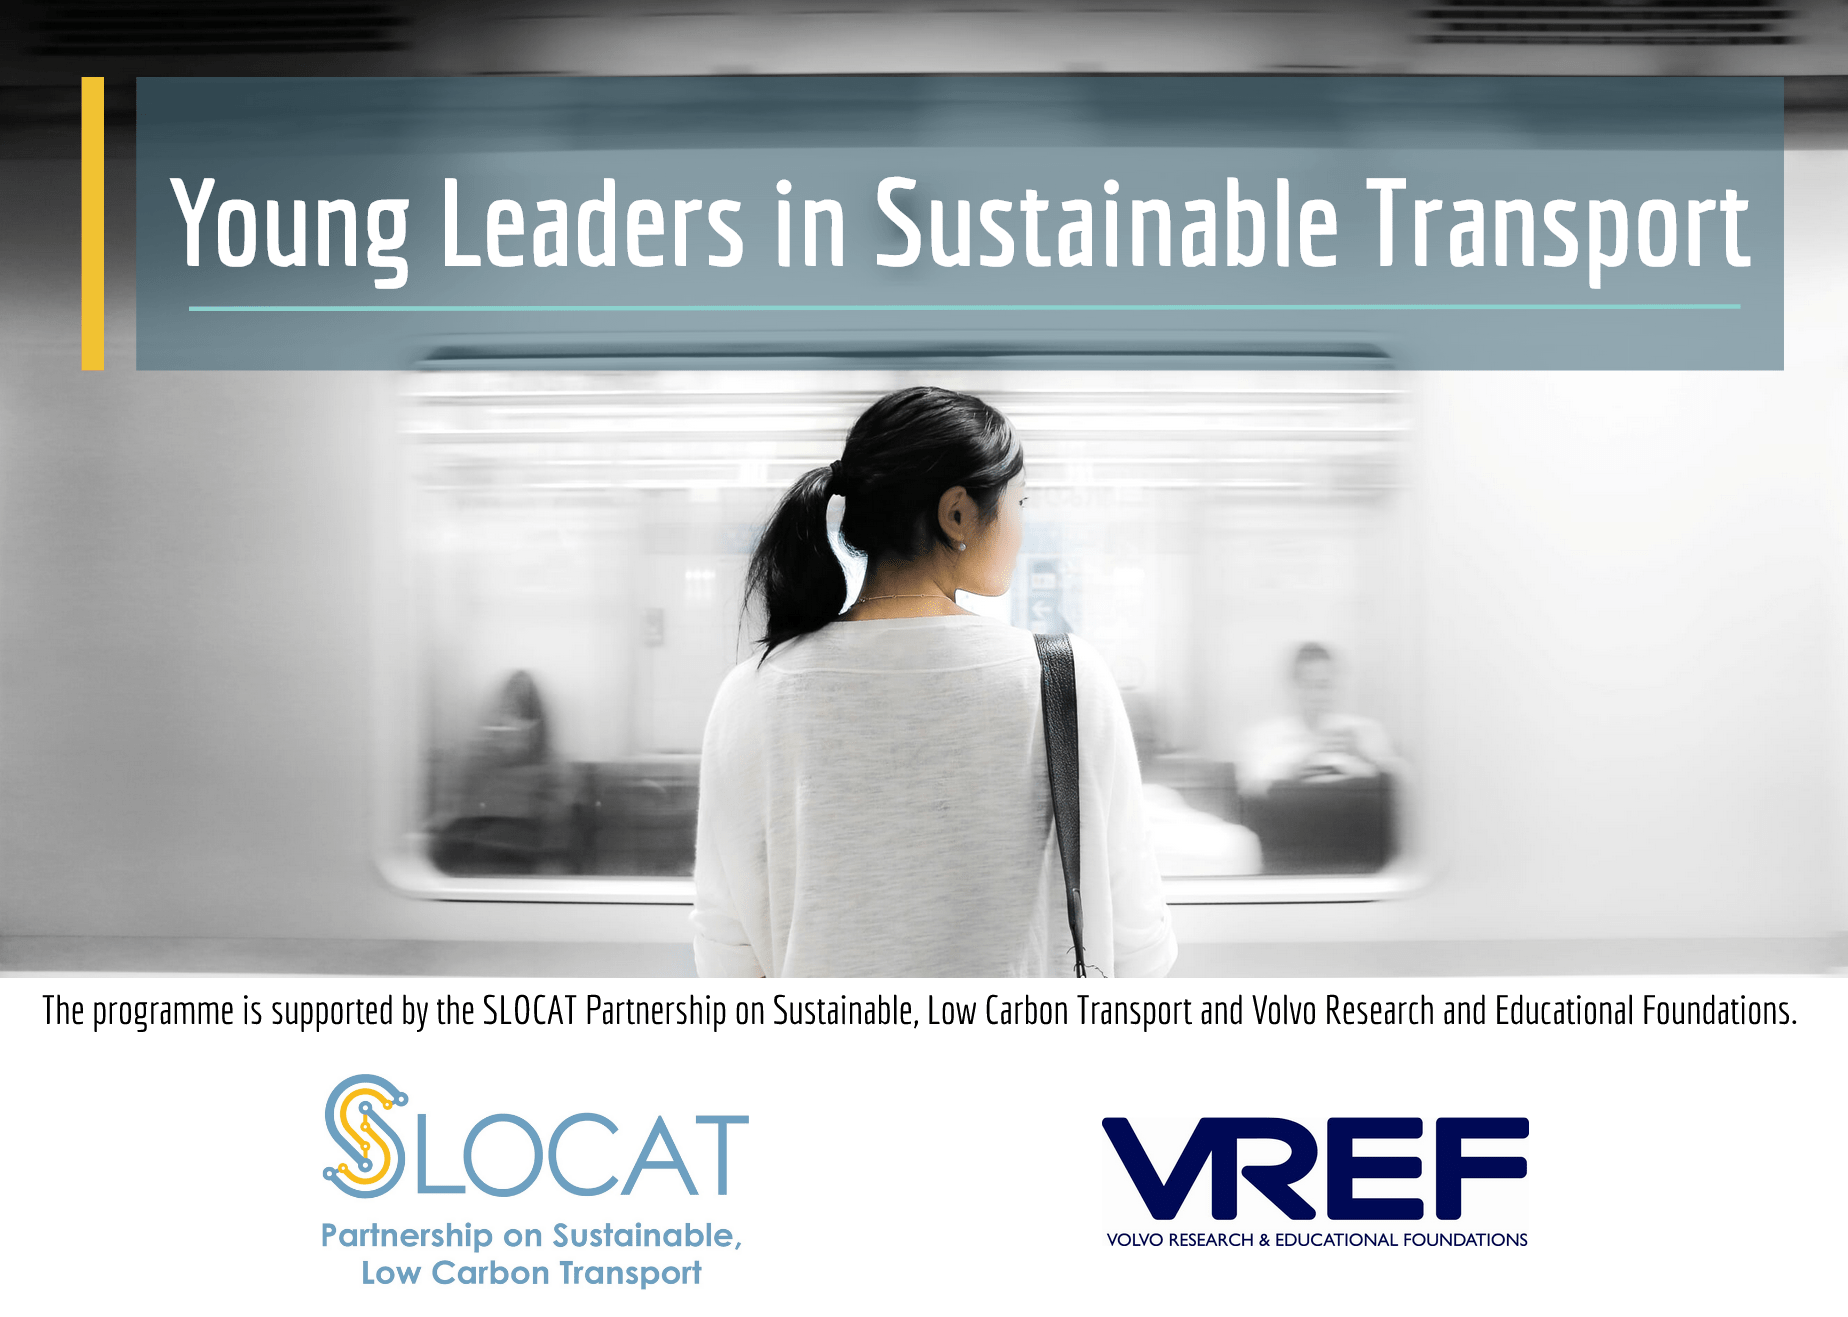 Call for Applications for Young Leaders in Sustainable Transport 2020